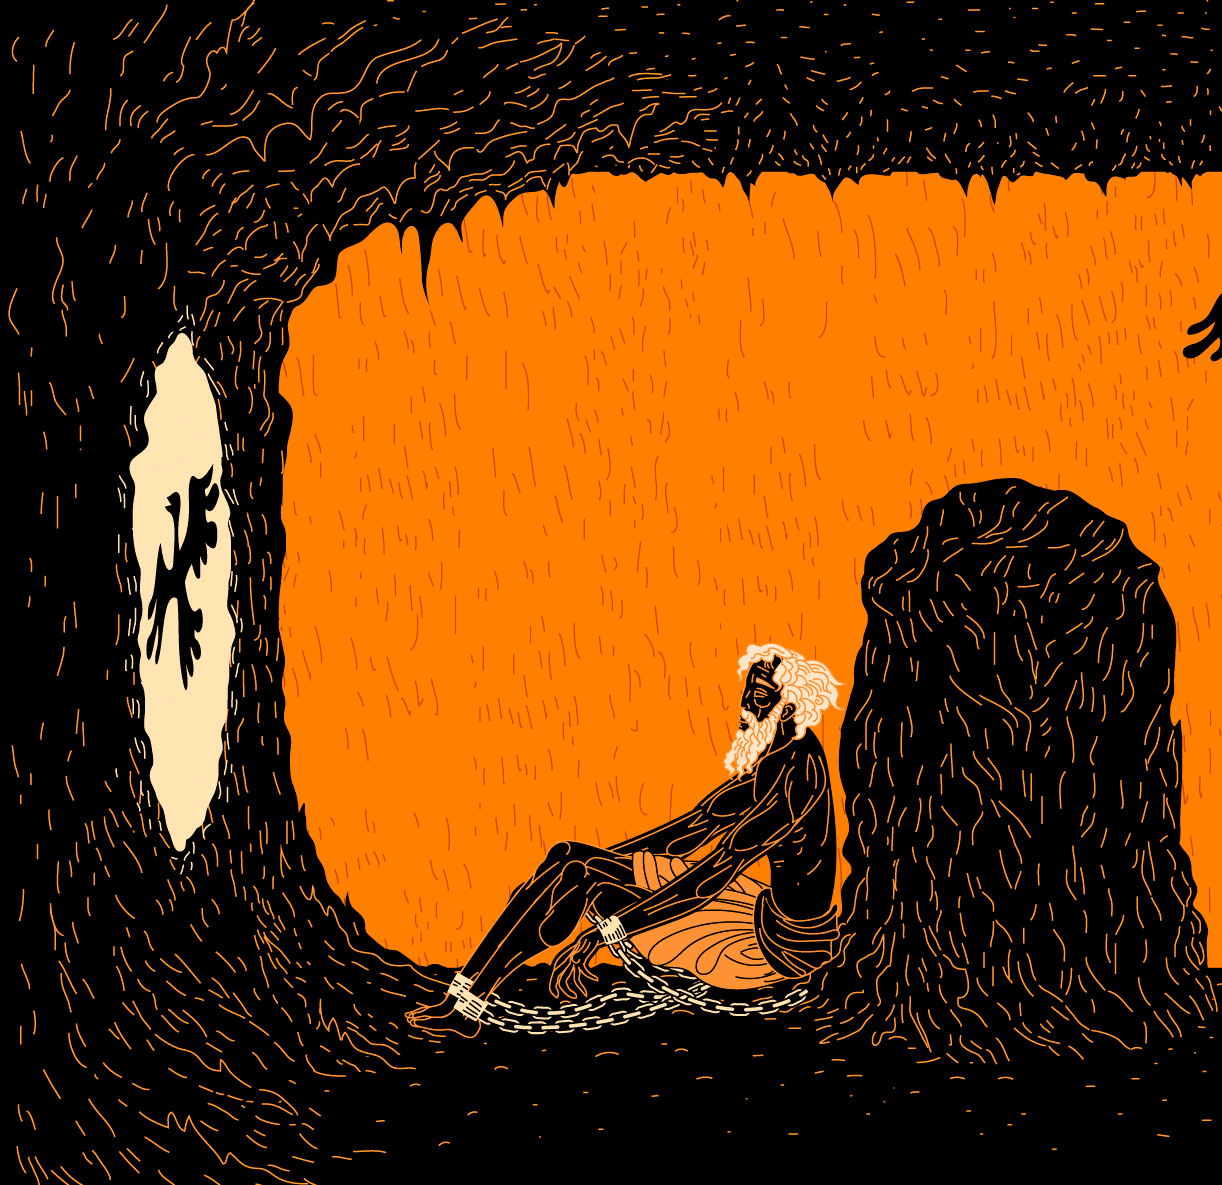 The bird in the cave